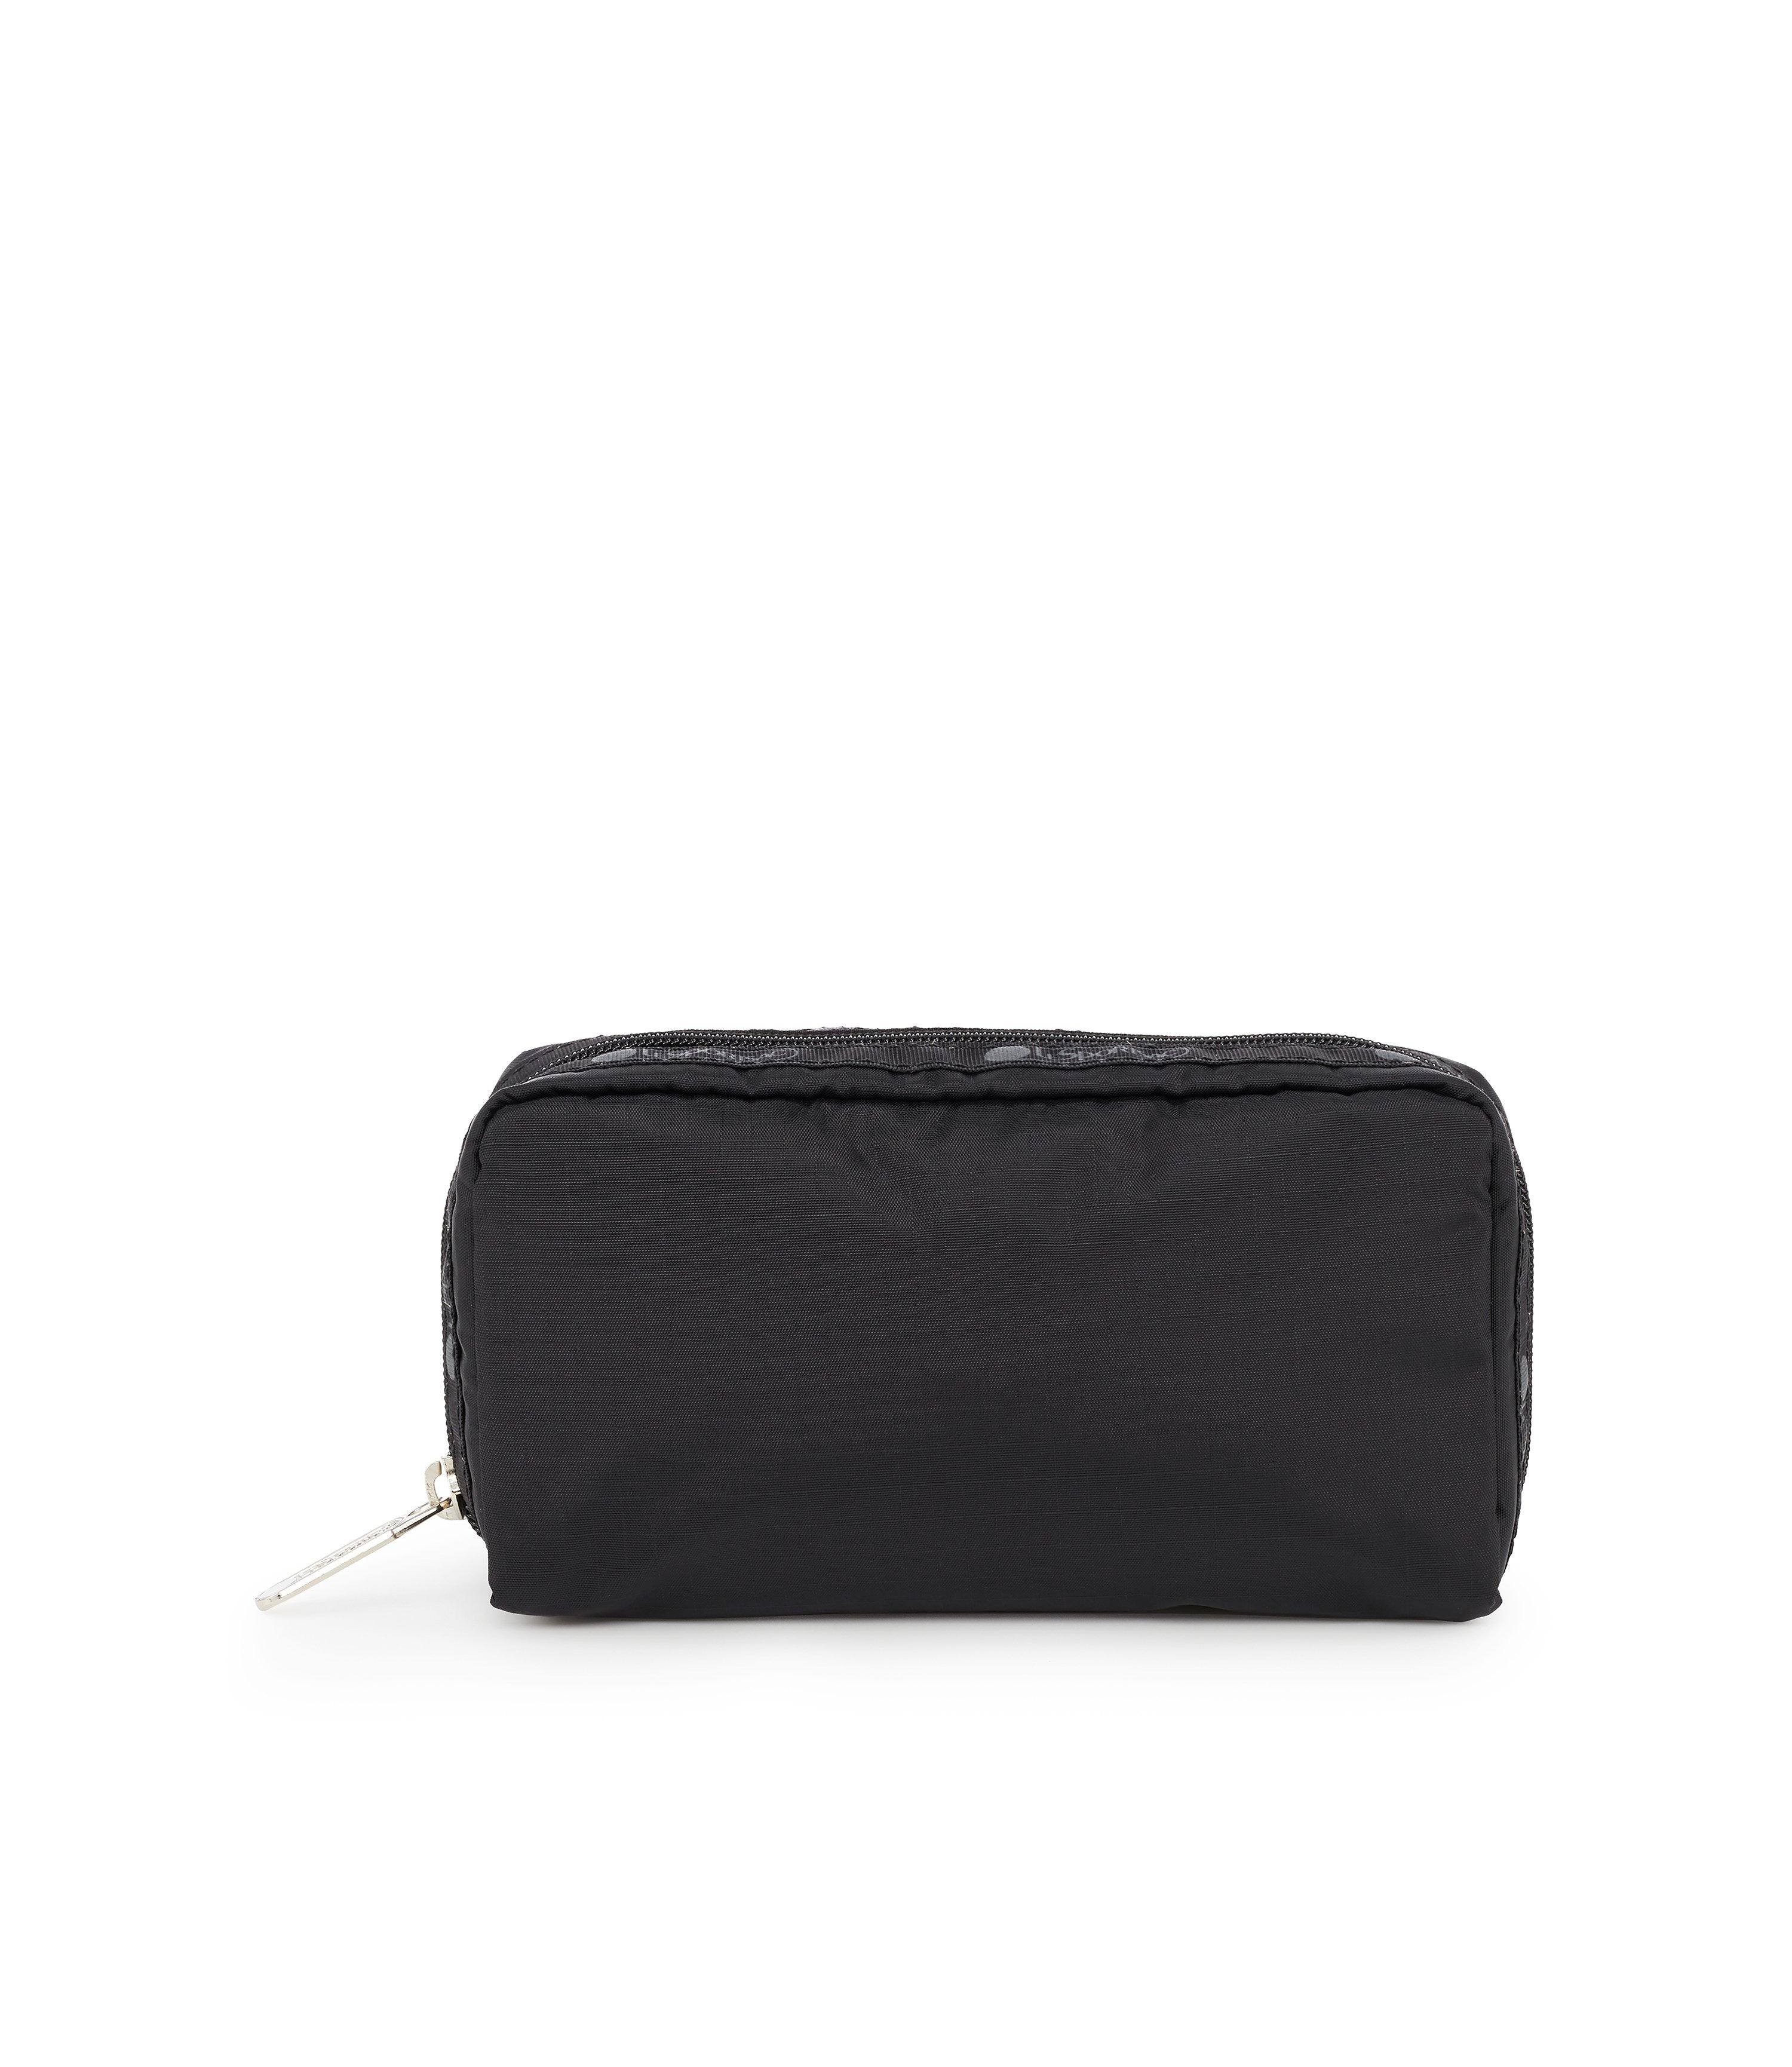 Cute Small Makeup Bag | Rectangular Cosmetic Pouch | LeSportsac